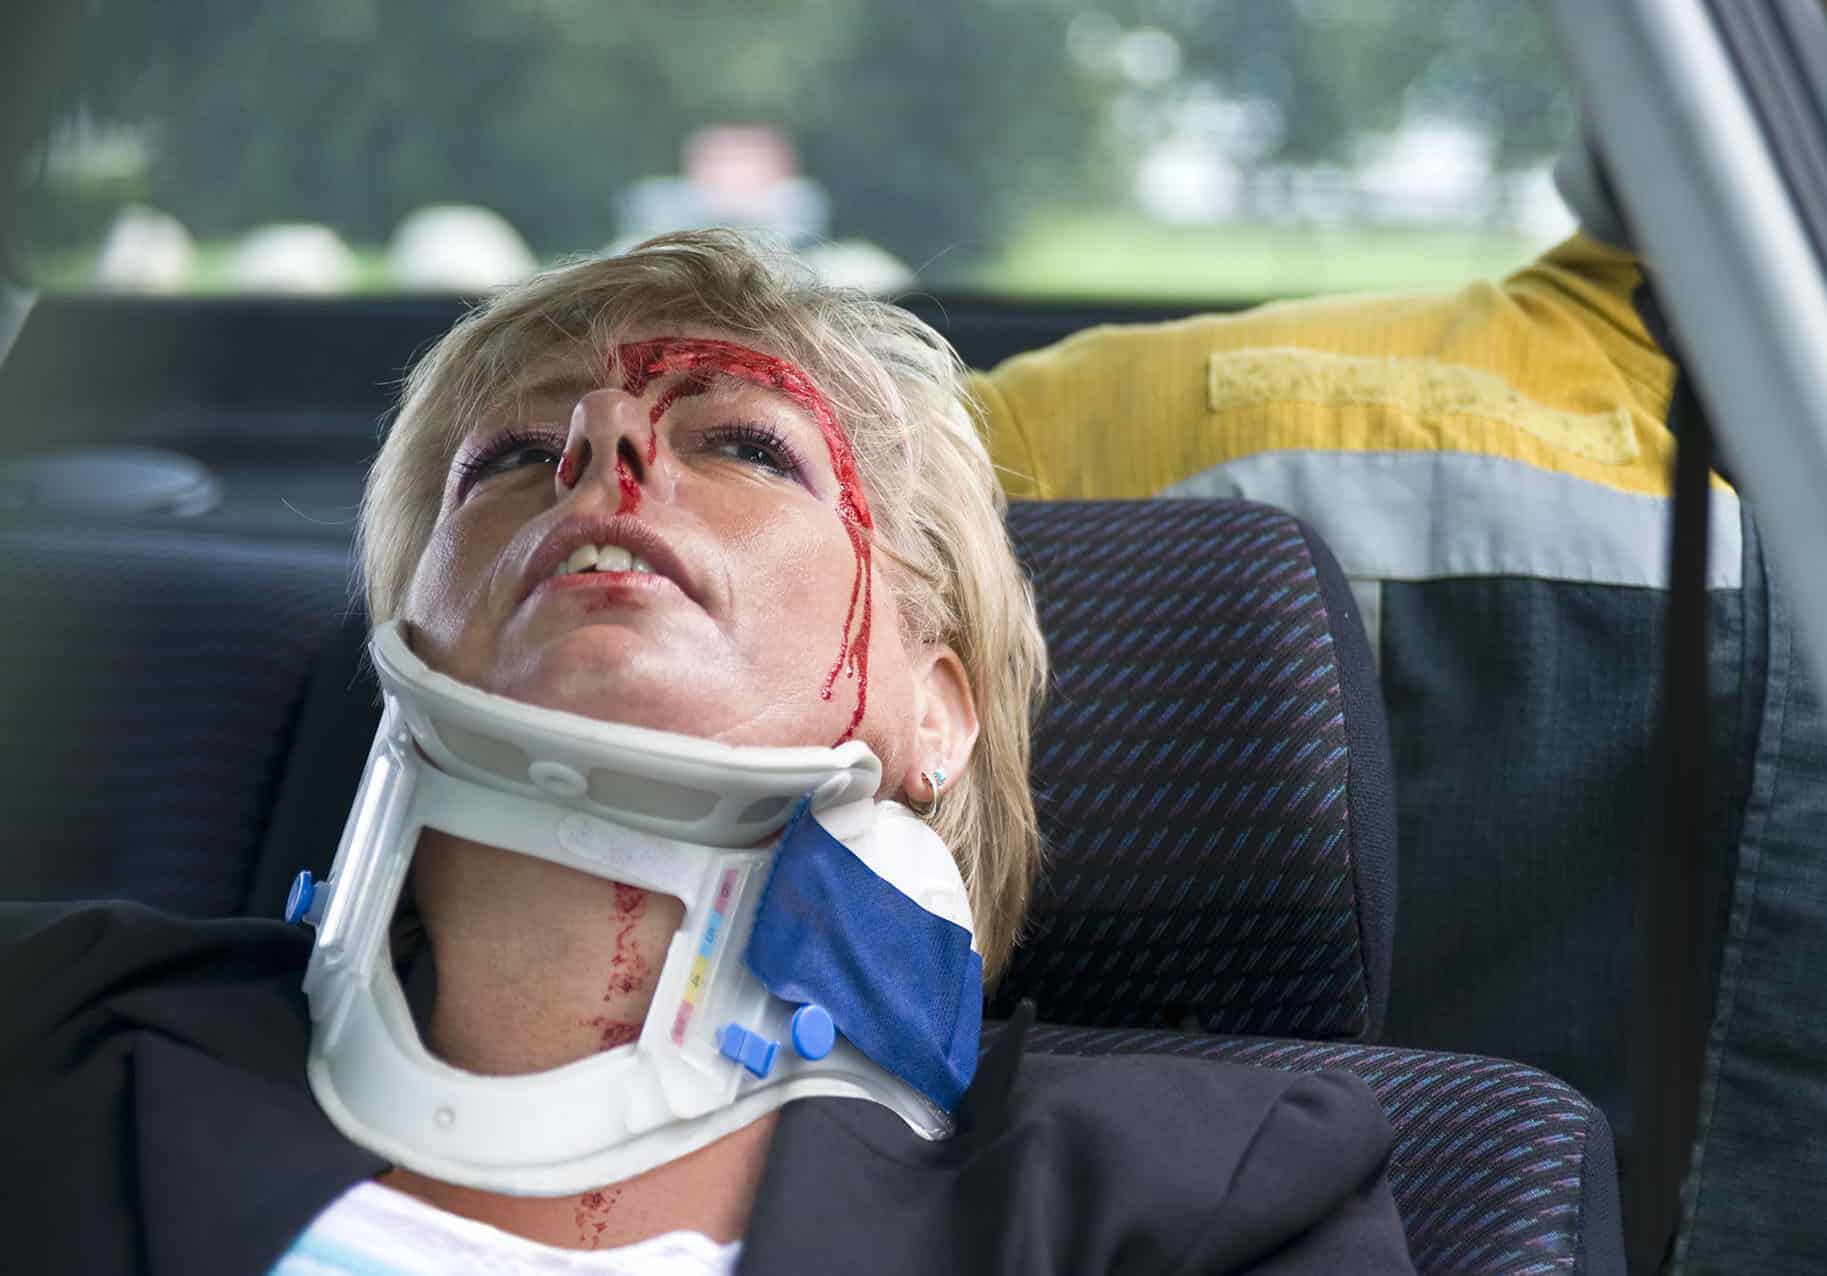 Neck brace around a woman's neck to support her spinal cord after a severe car accident